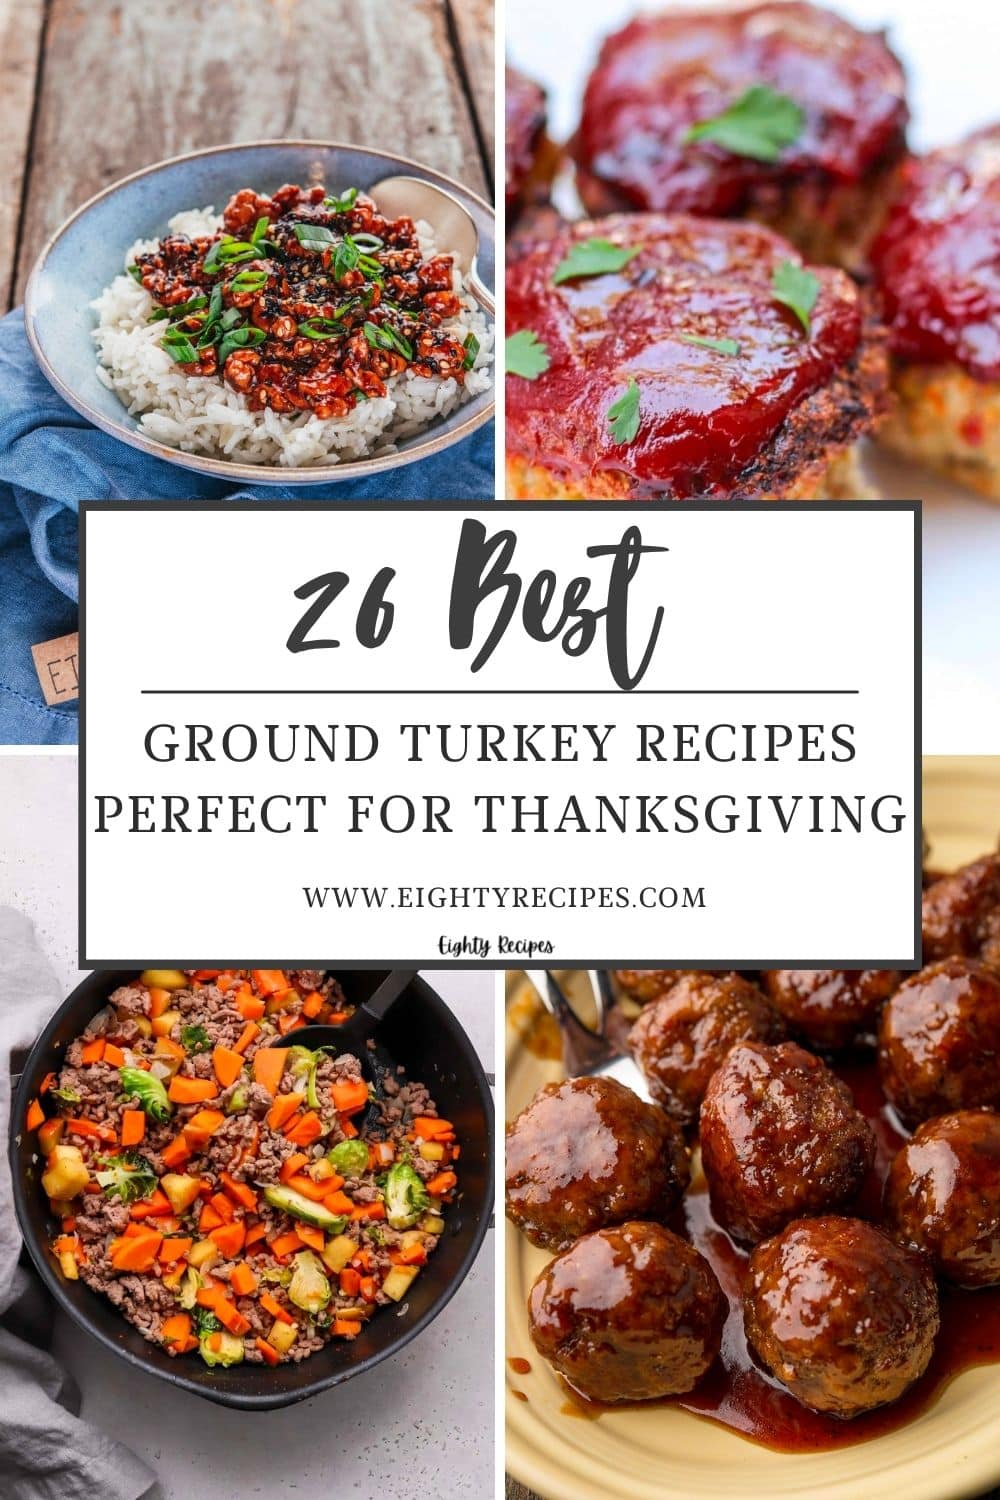 26 best ground turkey recipes perfect for thanksgiving